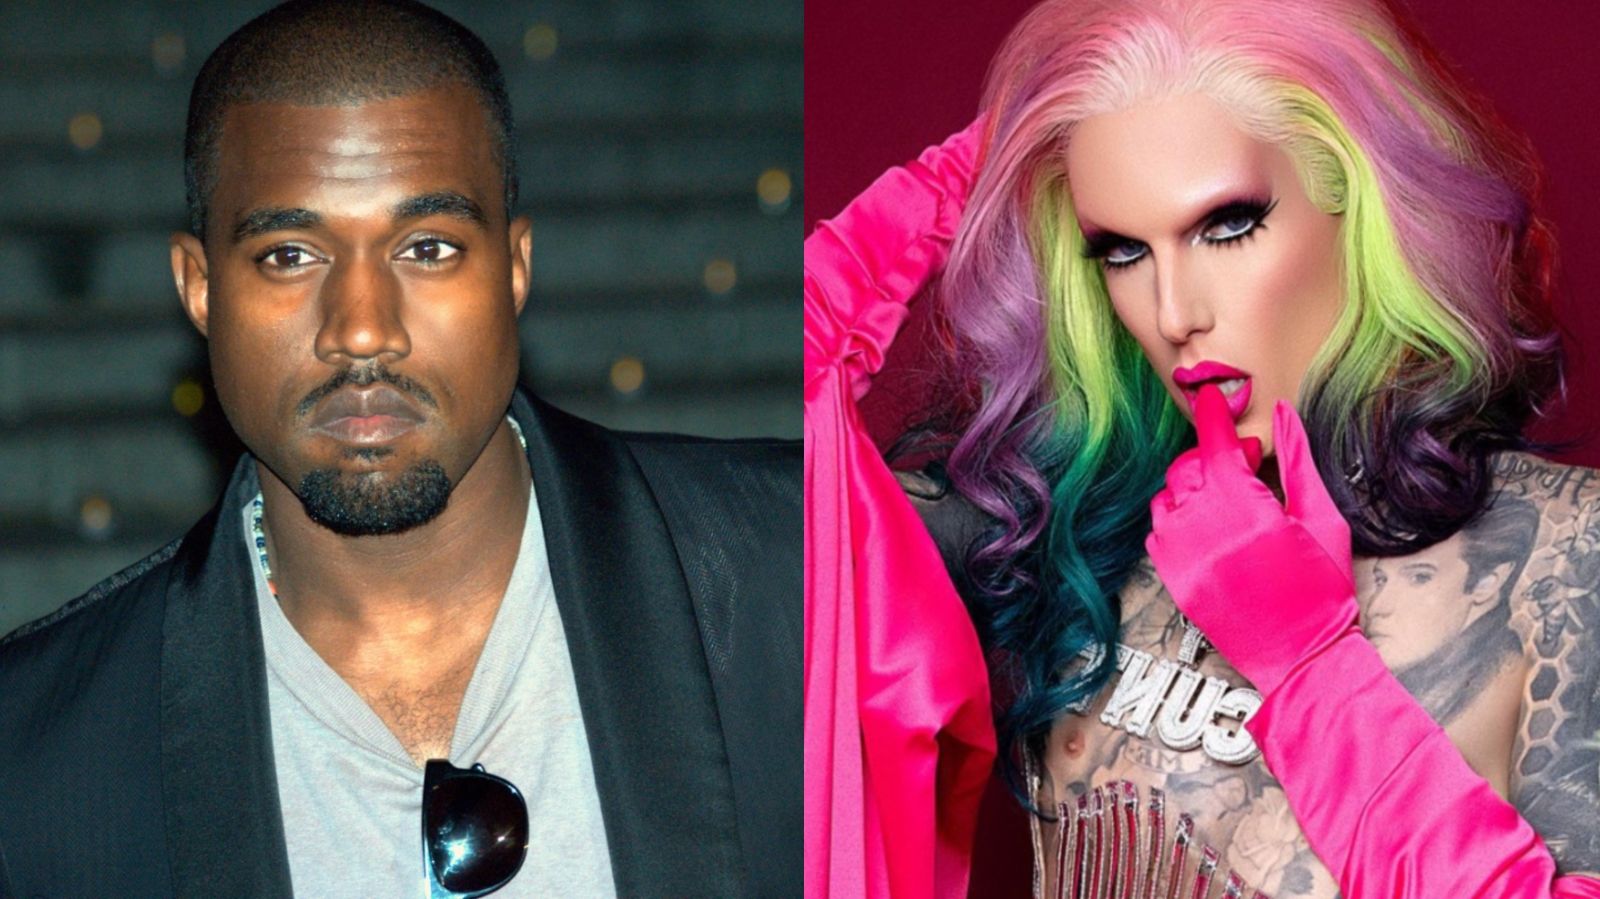 HOT: Kanye West is suspected of having an affair with makeup king Jeffree Star amid Kim's divorce drama, stirring up the owner's reaction - Photo 2.